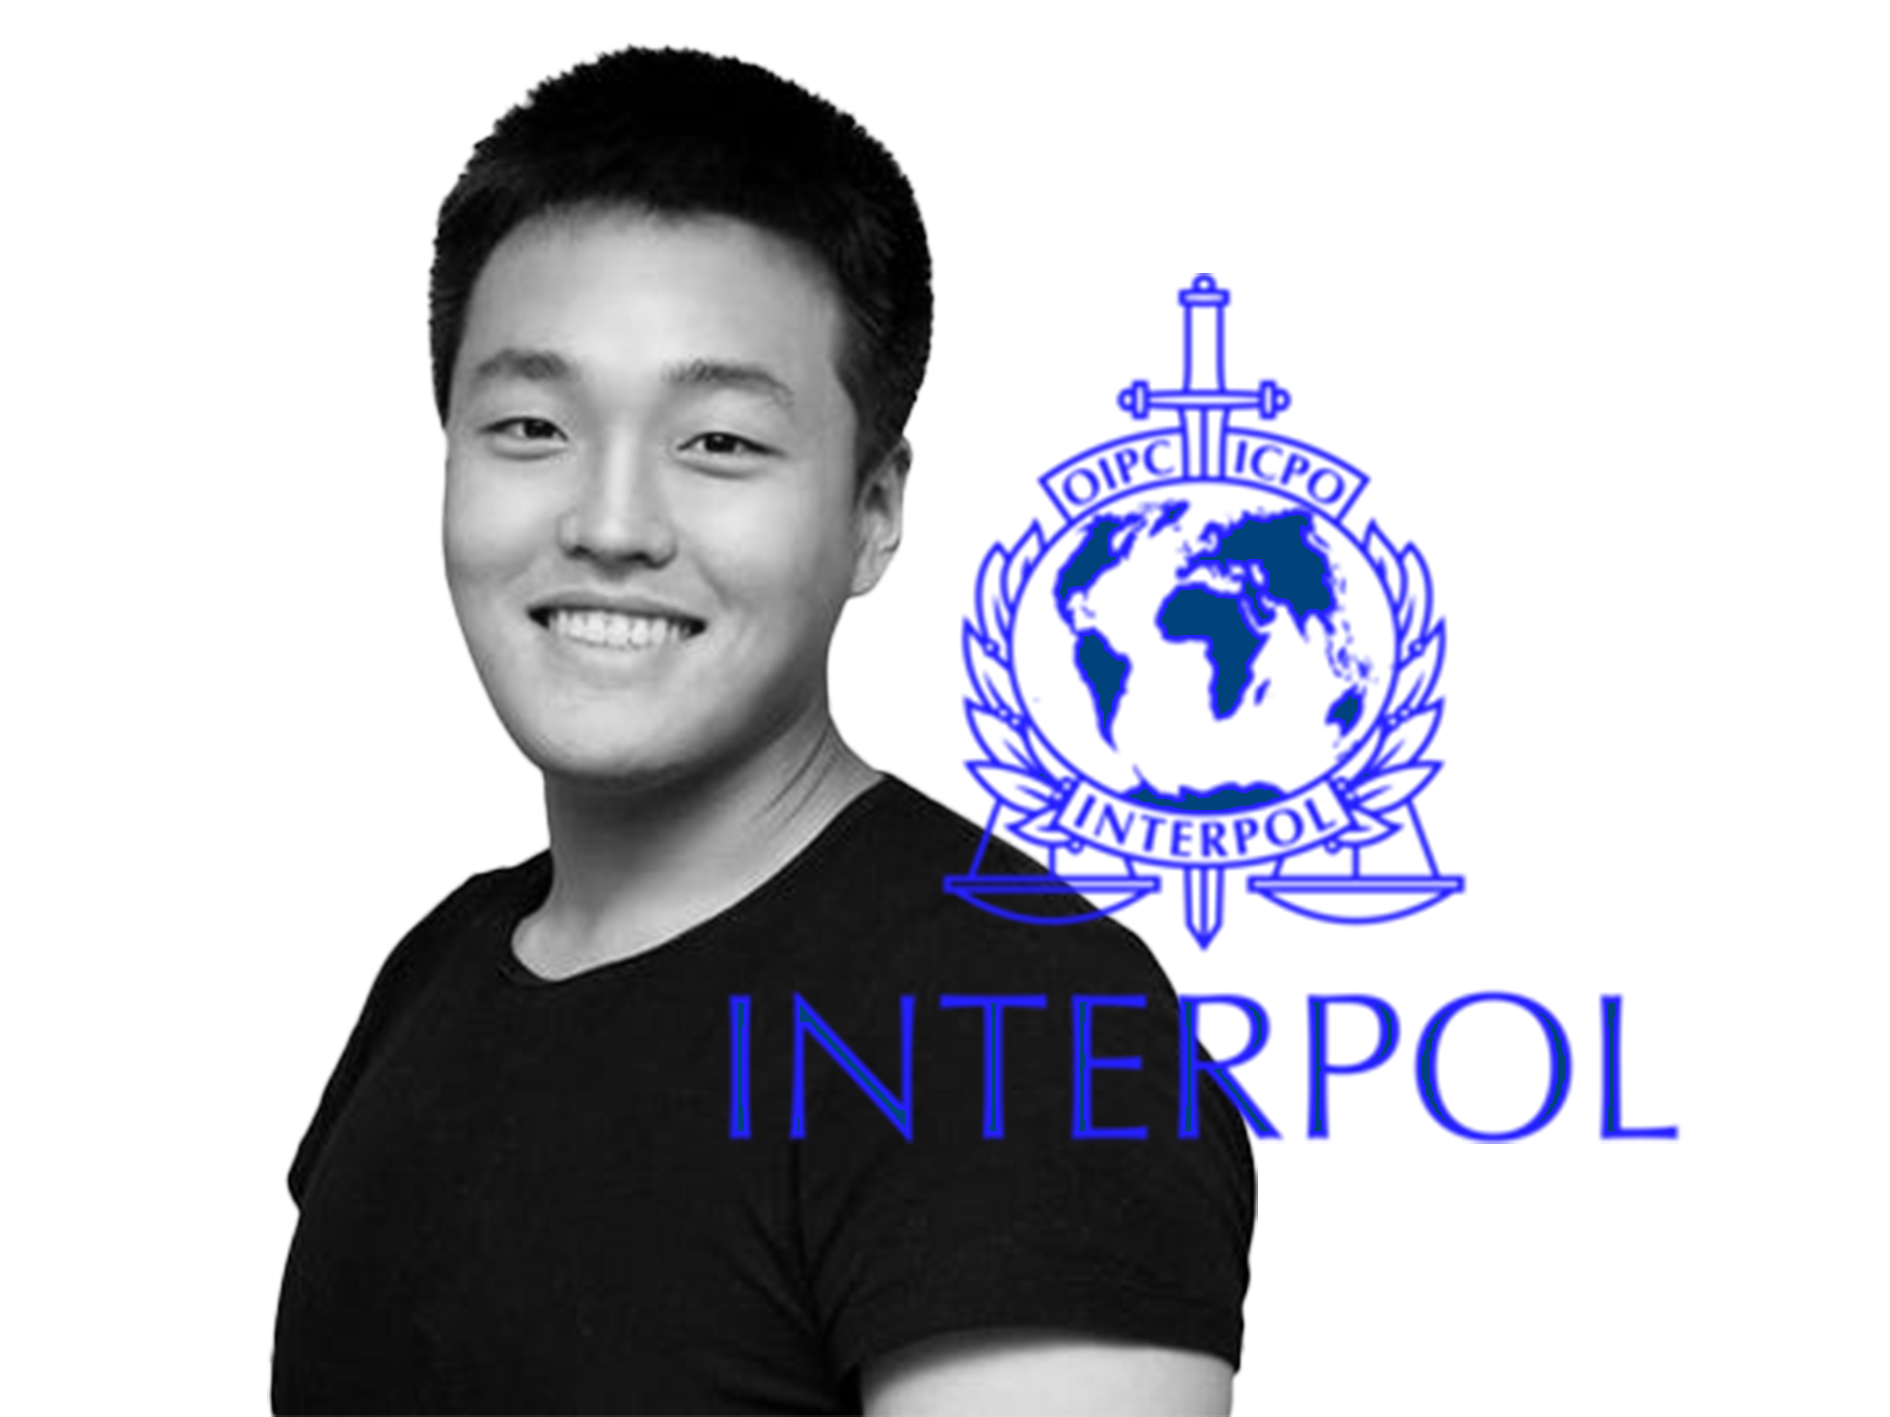 interpol-issues-red-notice-for-do-kwon-says-south-korean-prosecutor